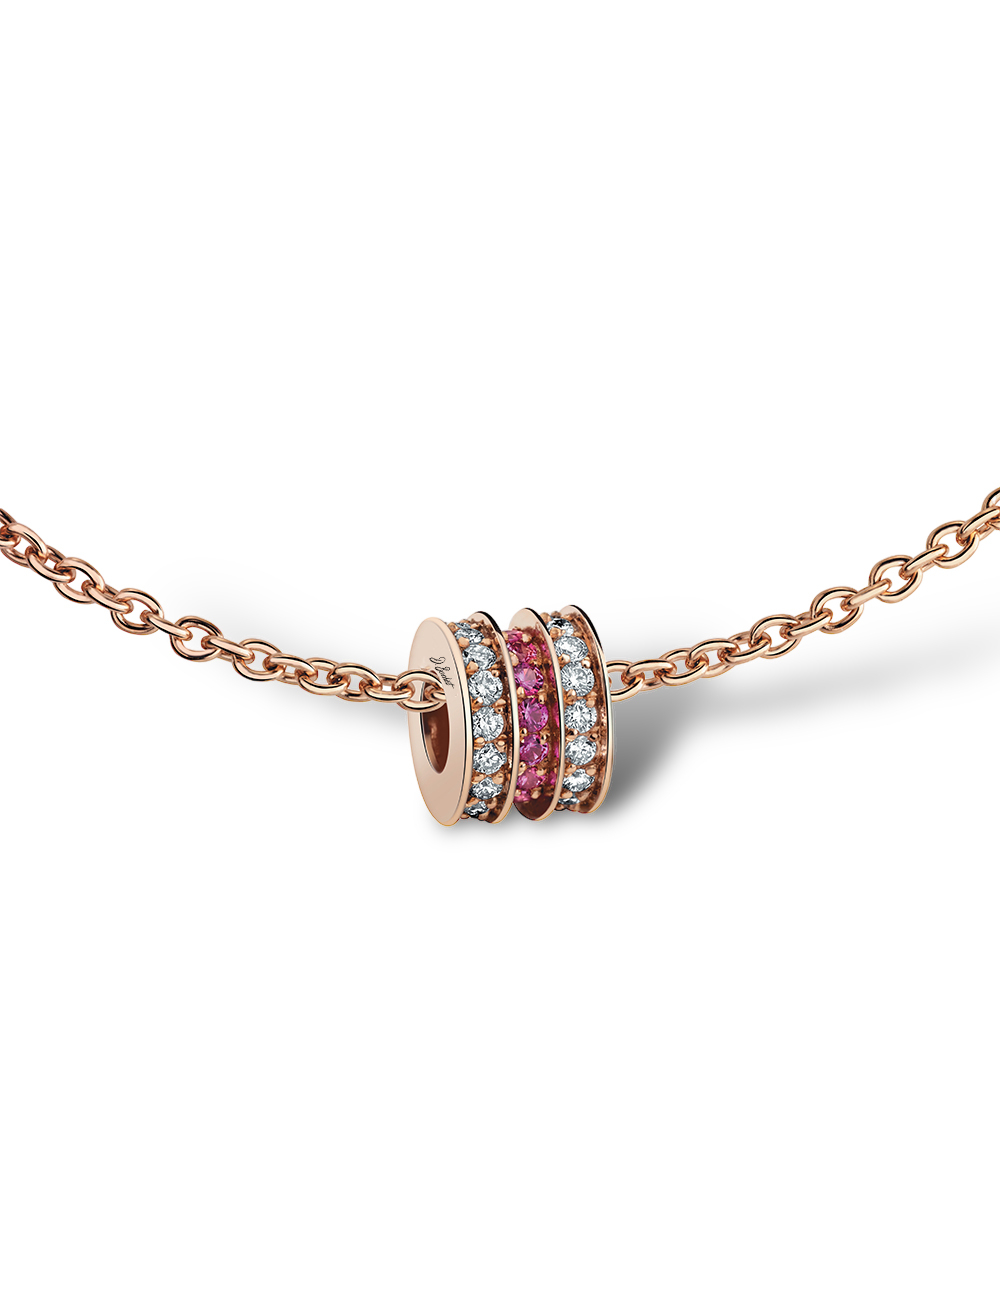 Rose gold pendant with white diamonds and pink sapphires, refined luxury.